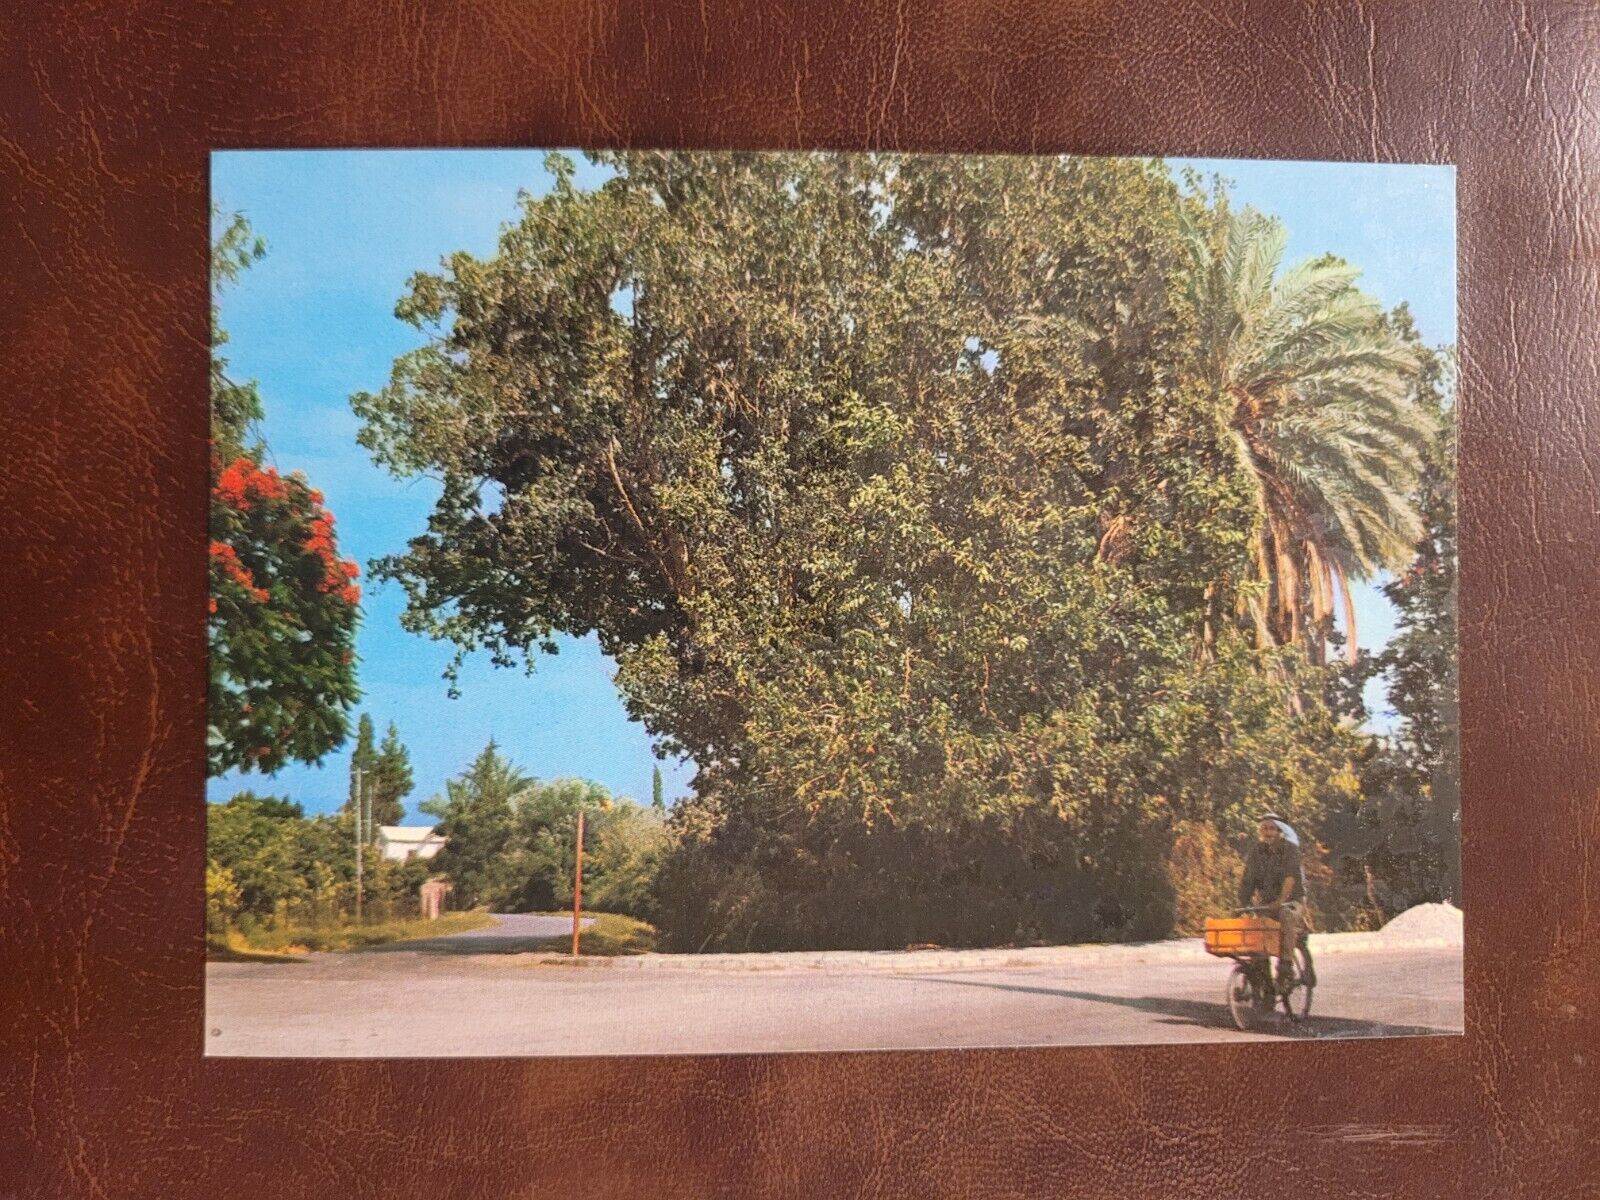 Vintage Postcard 4x6 The Sycomore Tree of Jericho Israel and Jesus 1970s 